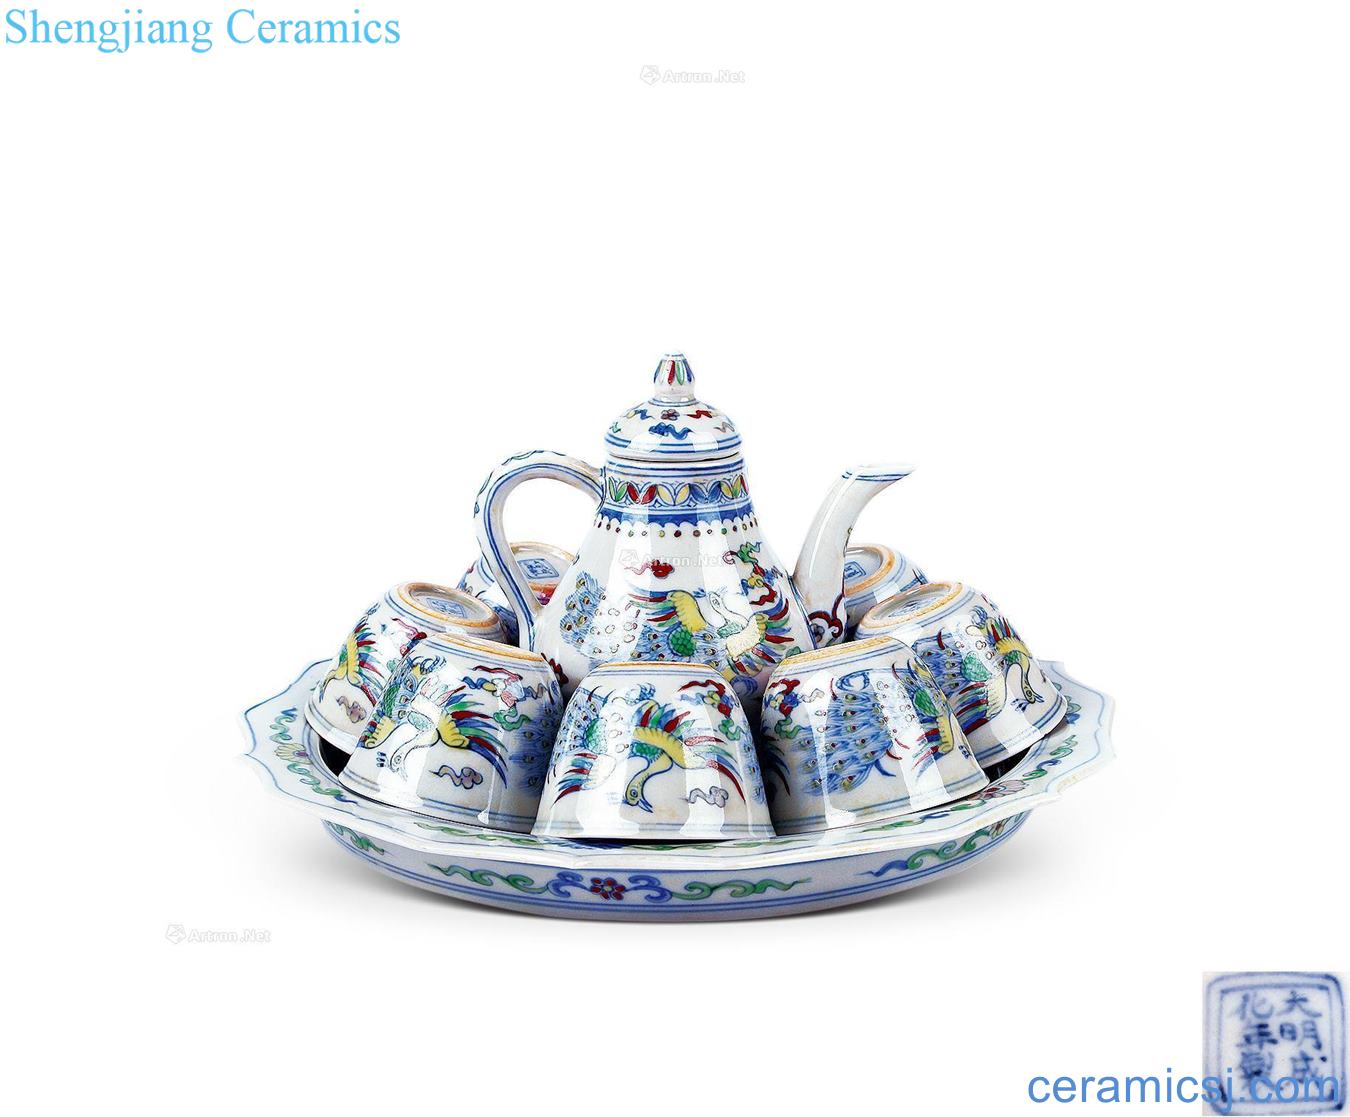 Ming chenghua Fight colourful feng grain ewer, cup, tray (a)